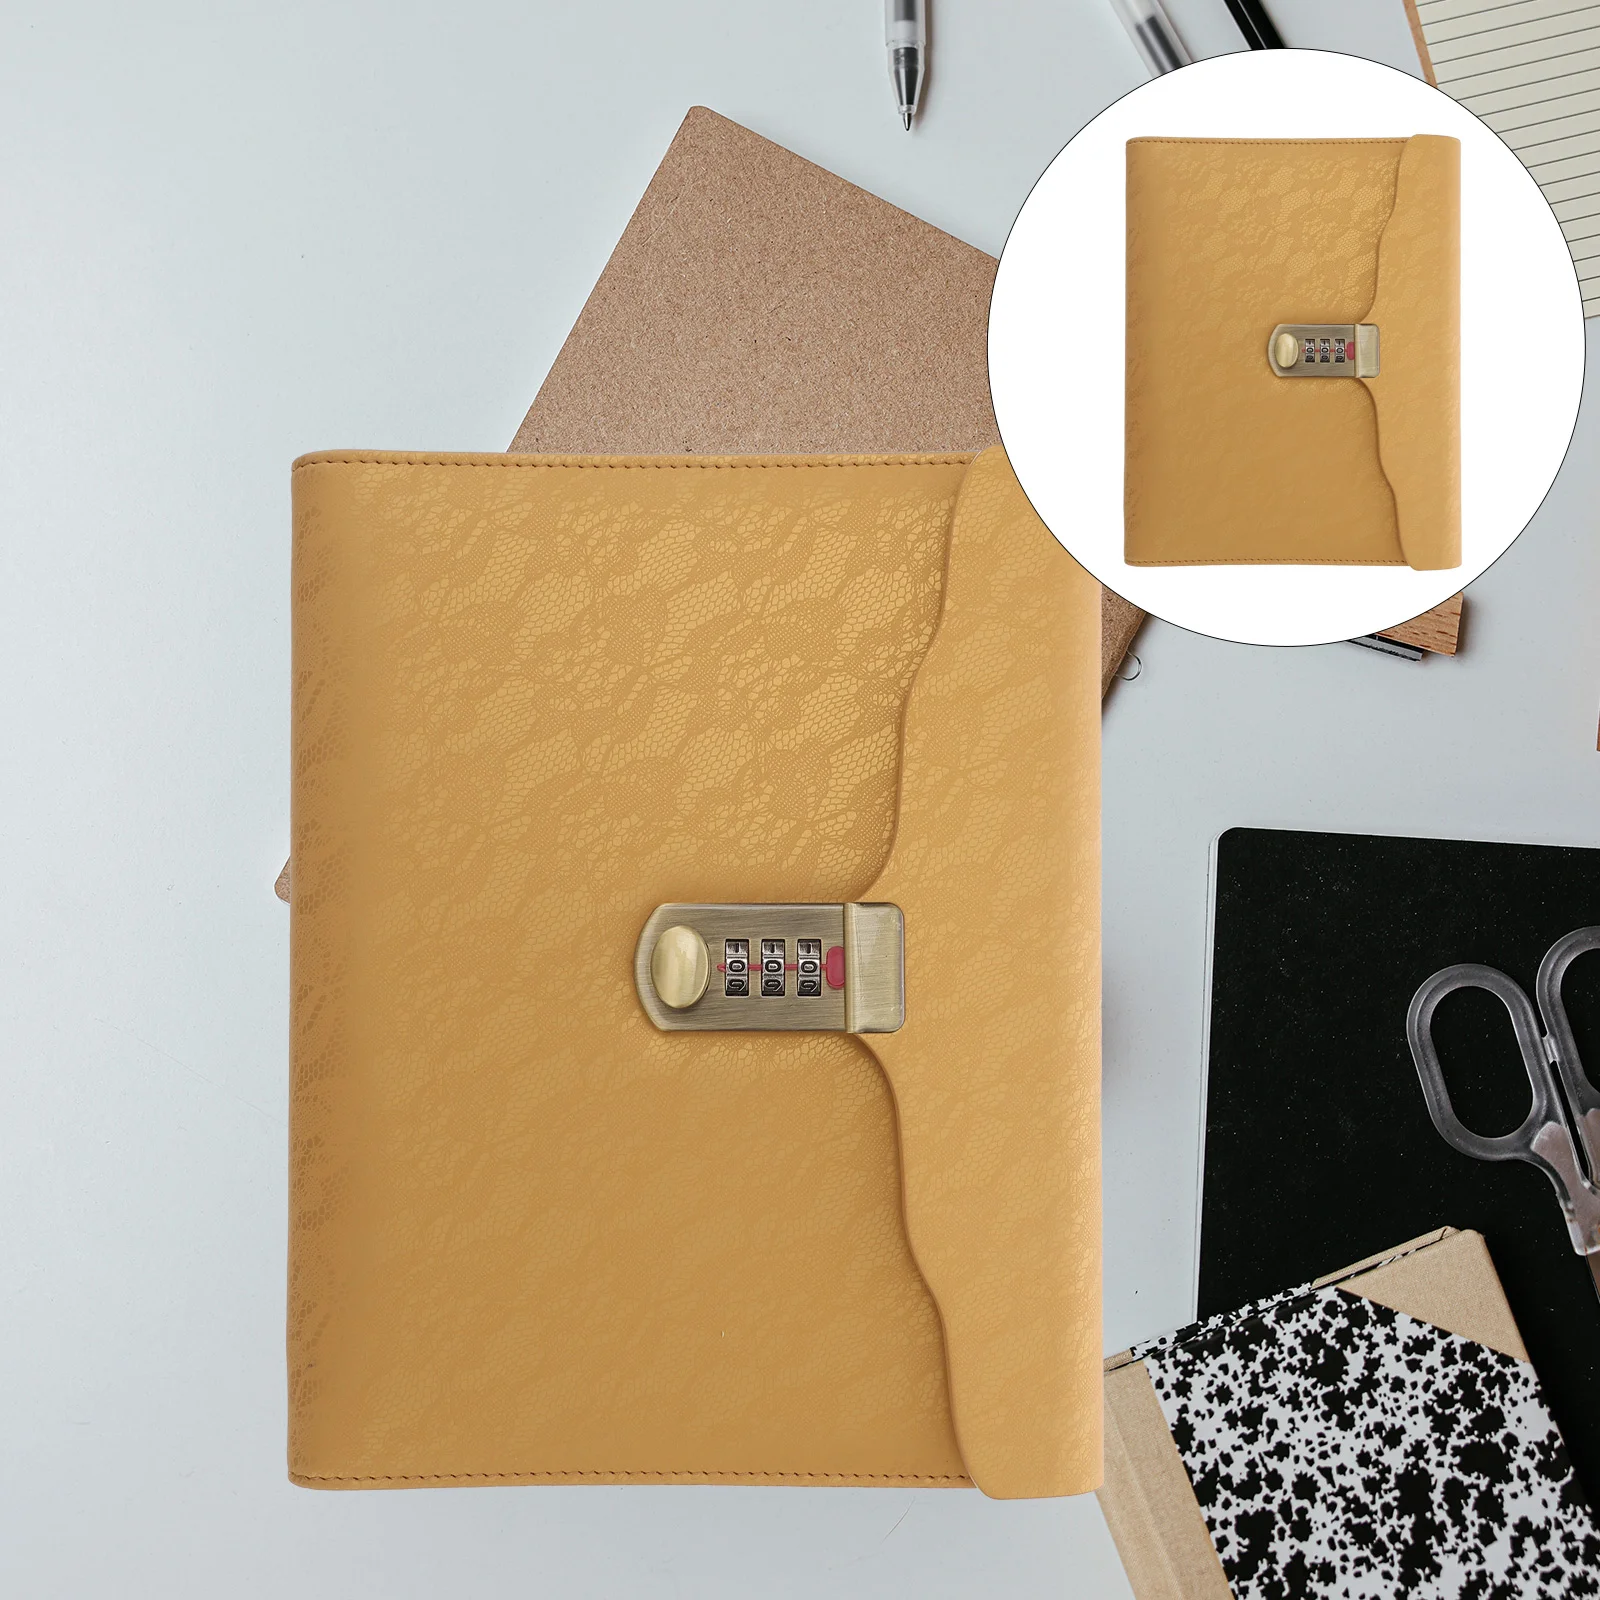 

Notebook Personal Secret Locking Diary PU Memo A5 Notepad Blank Paper Writing Journals Lined Password The Accessories